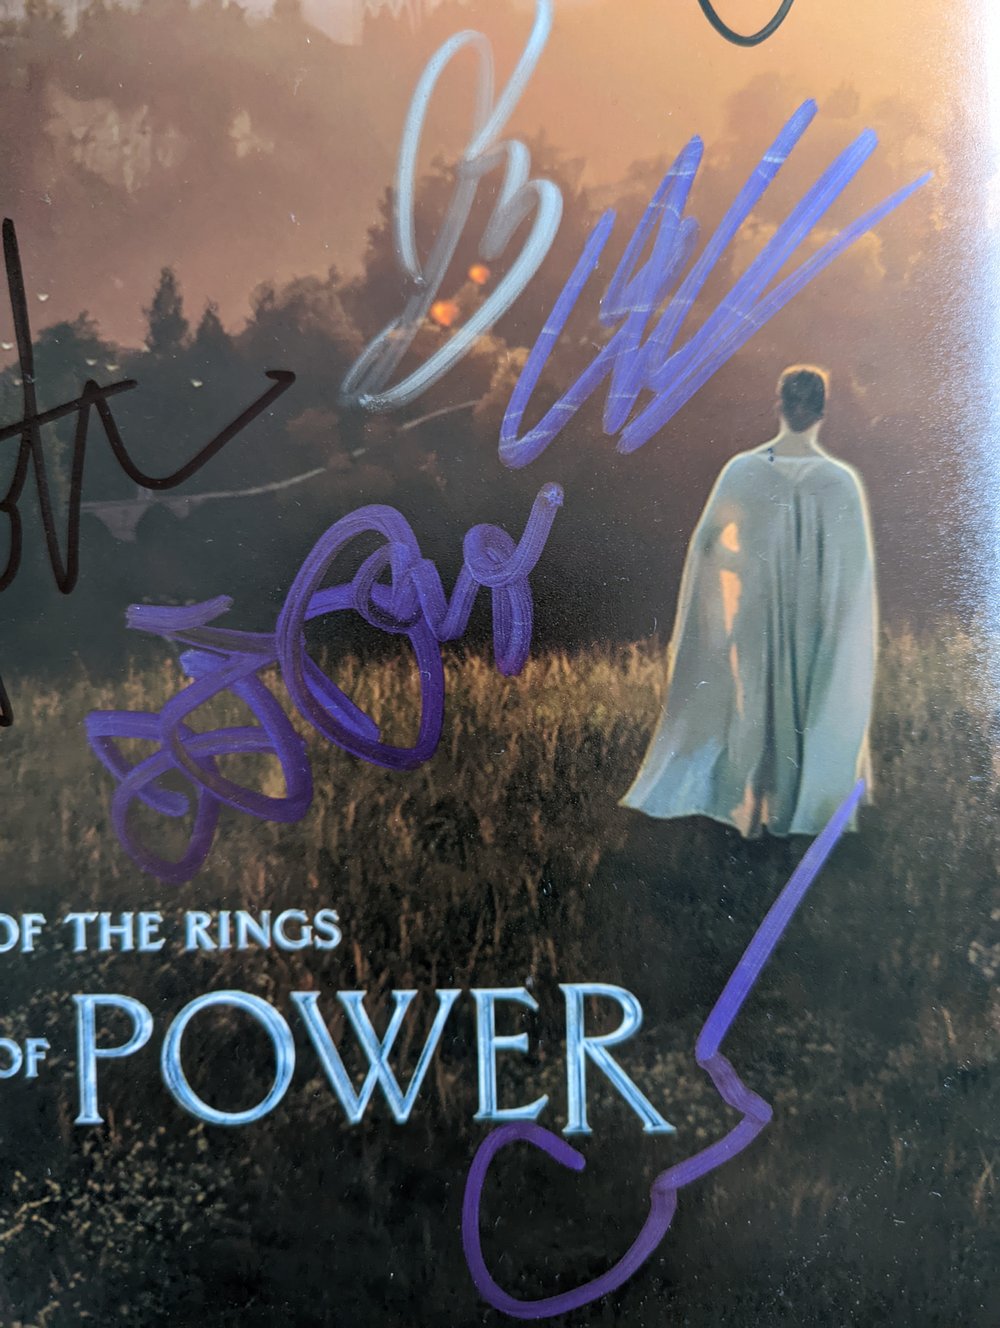 The Rings Of Power Multi Cast Signed 14x11 Photo